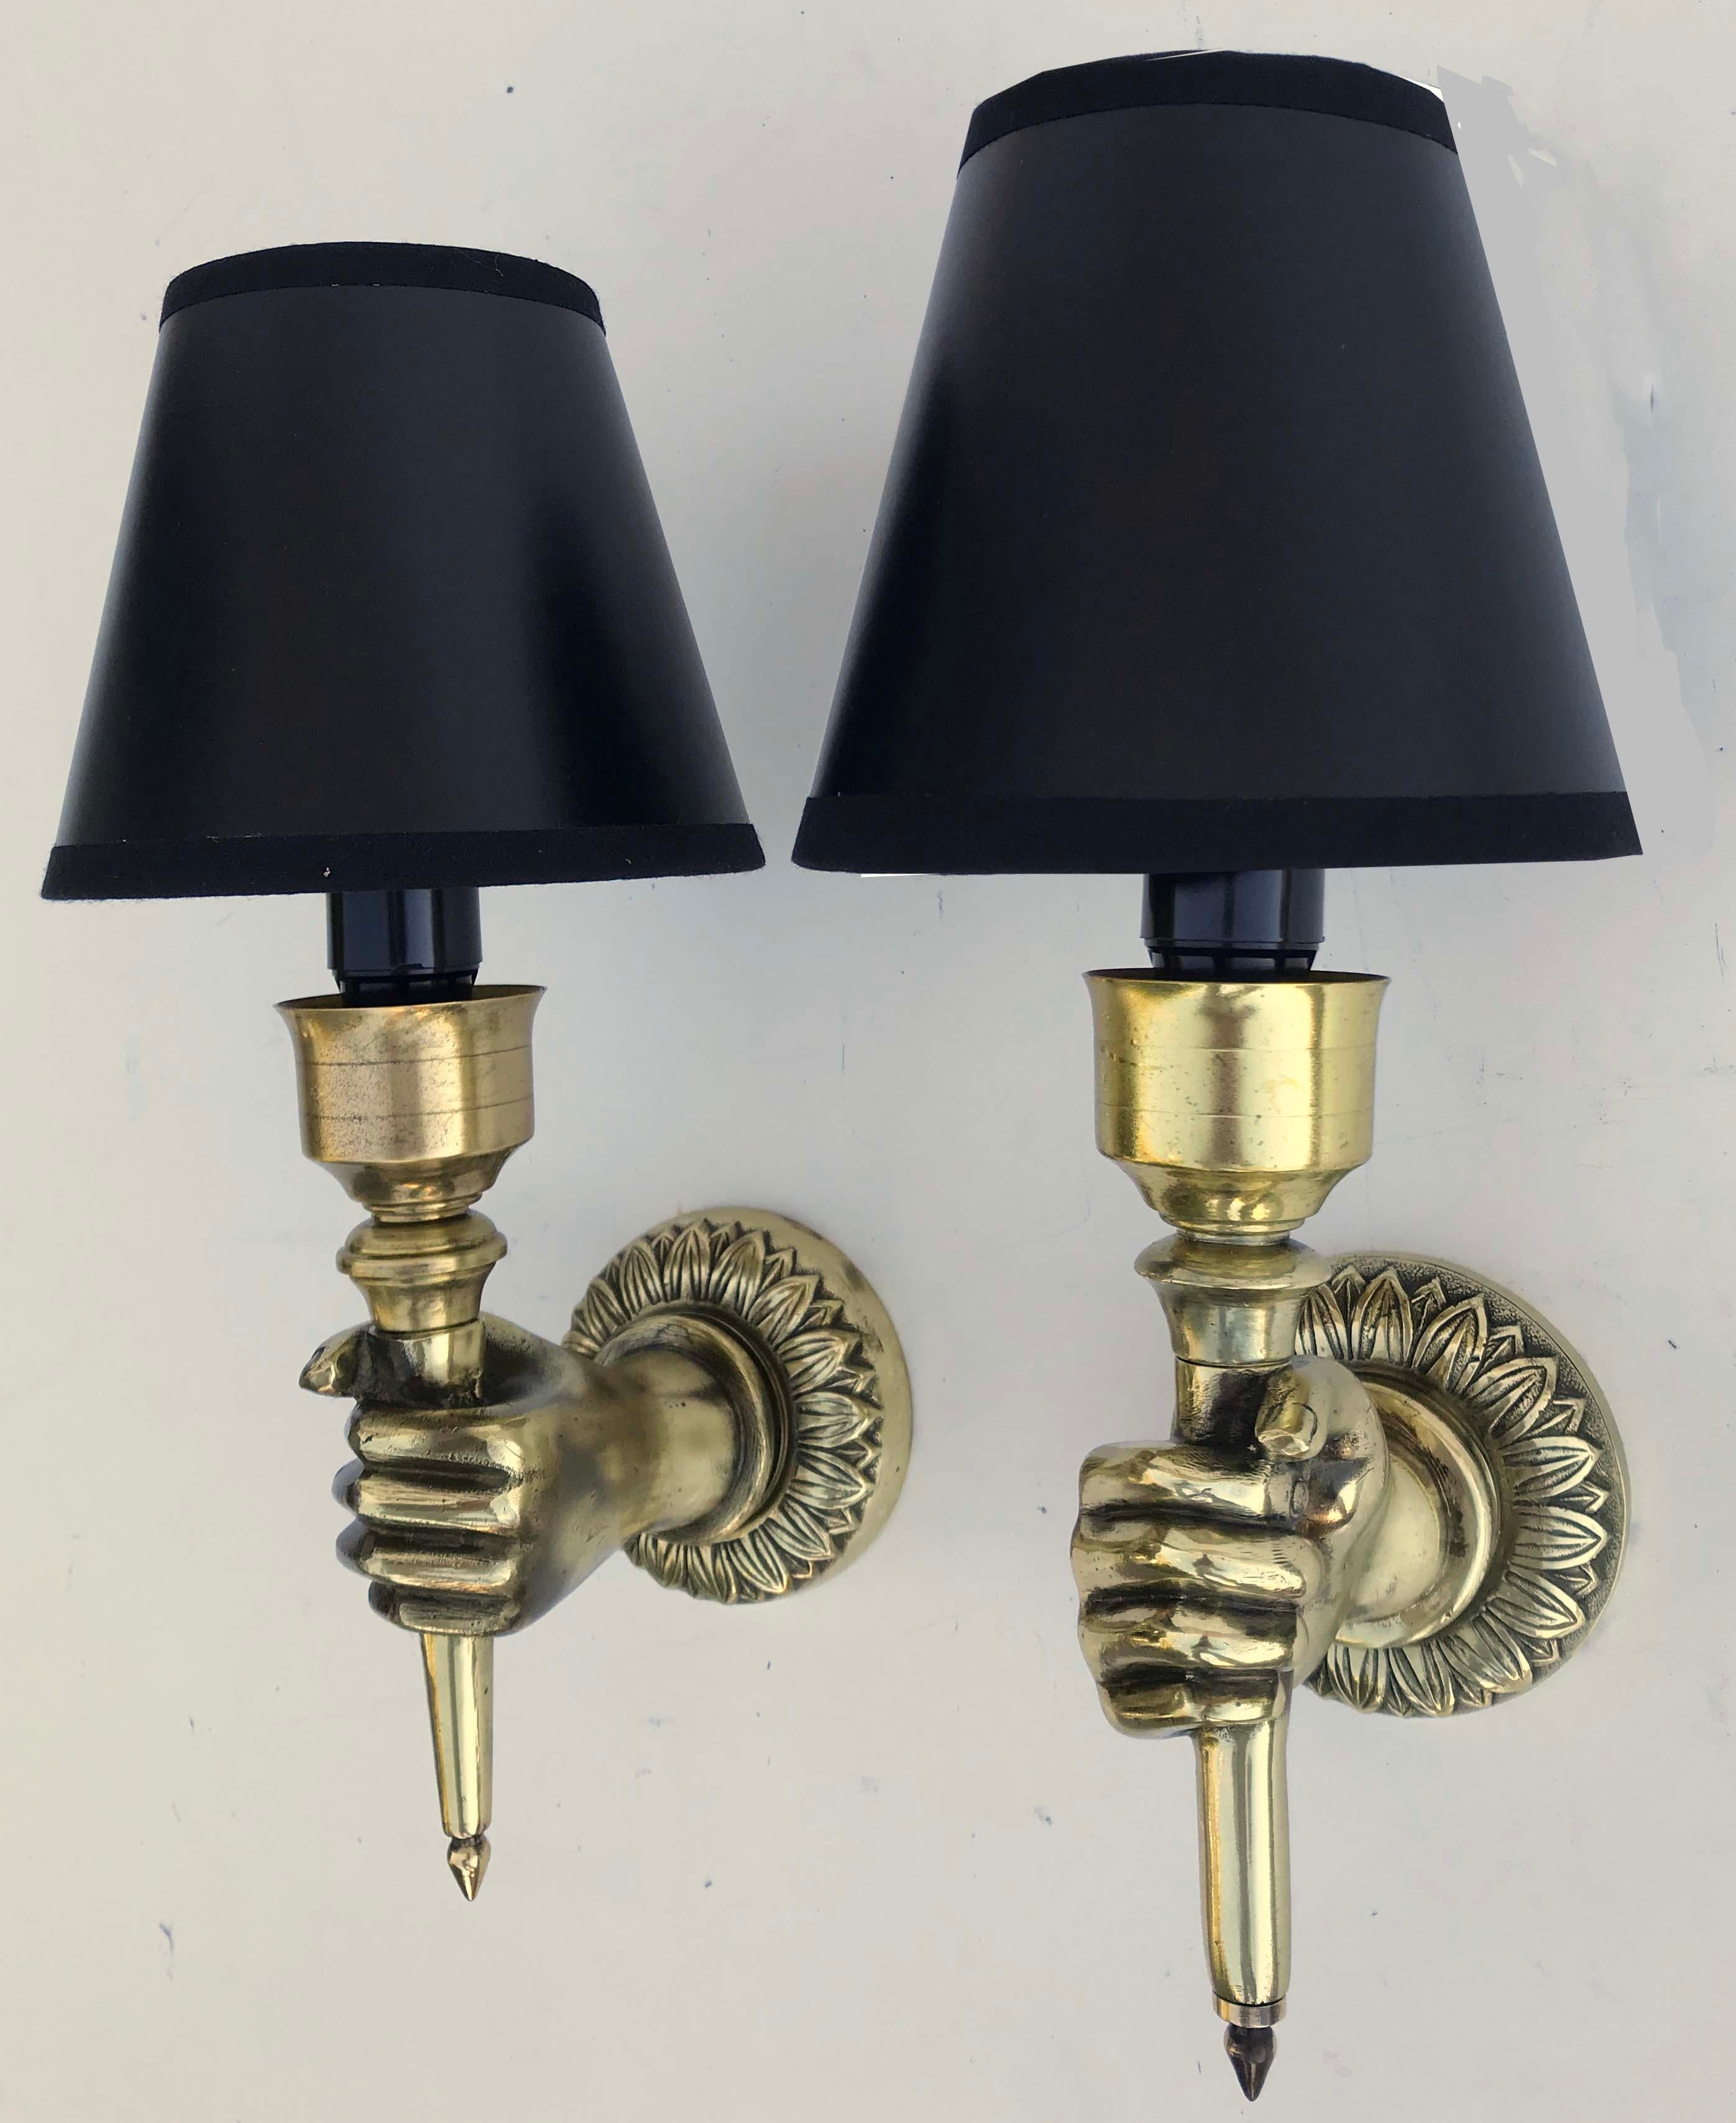 Superb pair of bronze hand sconces by Andre Arbus
1-light, 40 watts max bulb
US rewired and in working condition
Measures: Back plate: 3.1/4